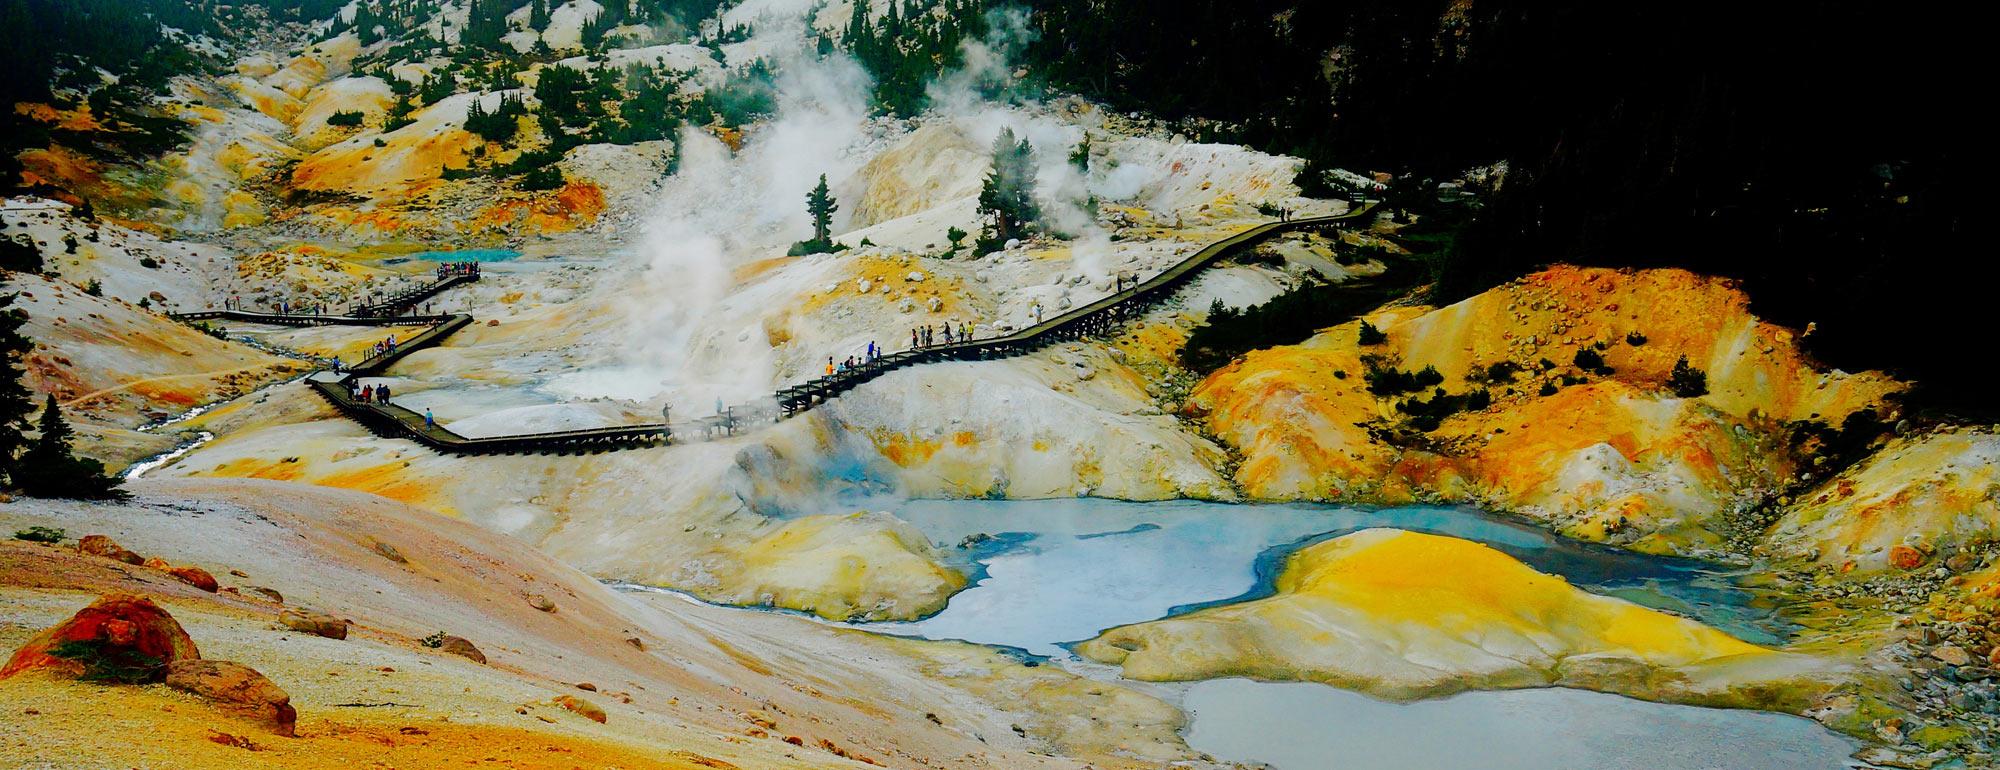 A crowd walking through a geothermal area in Lassen Volcanic National Park